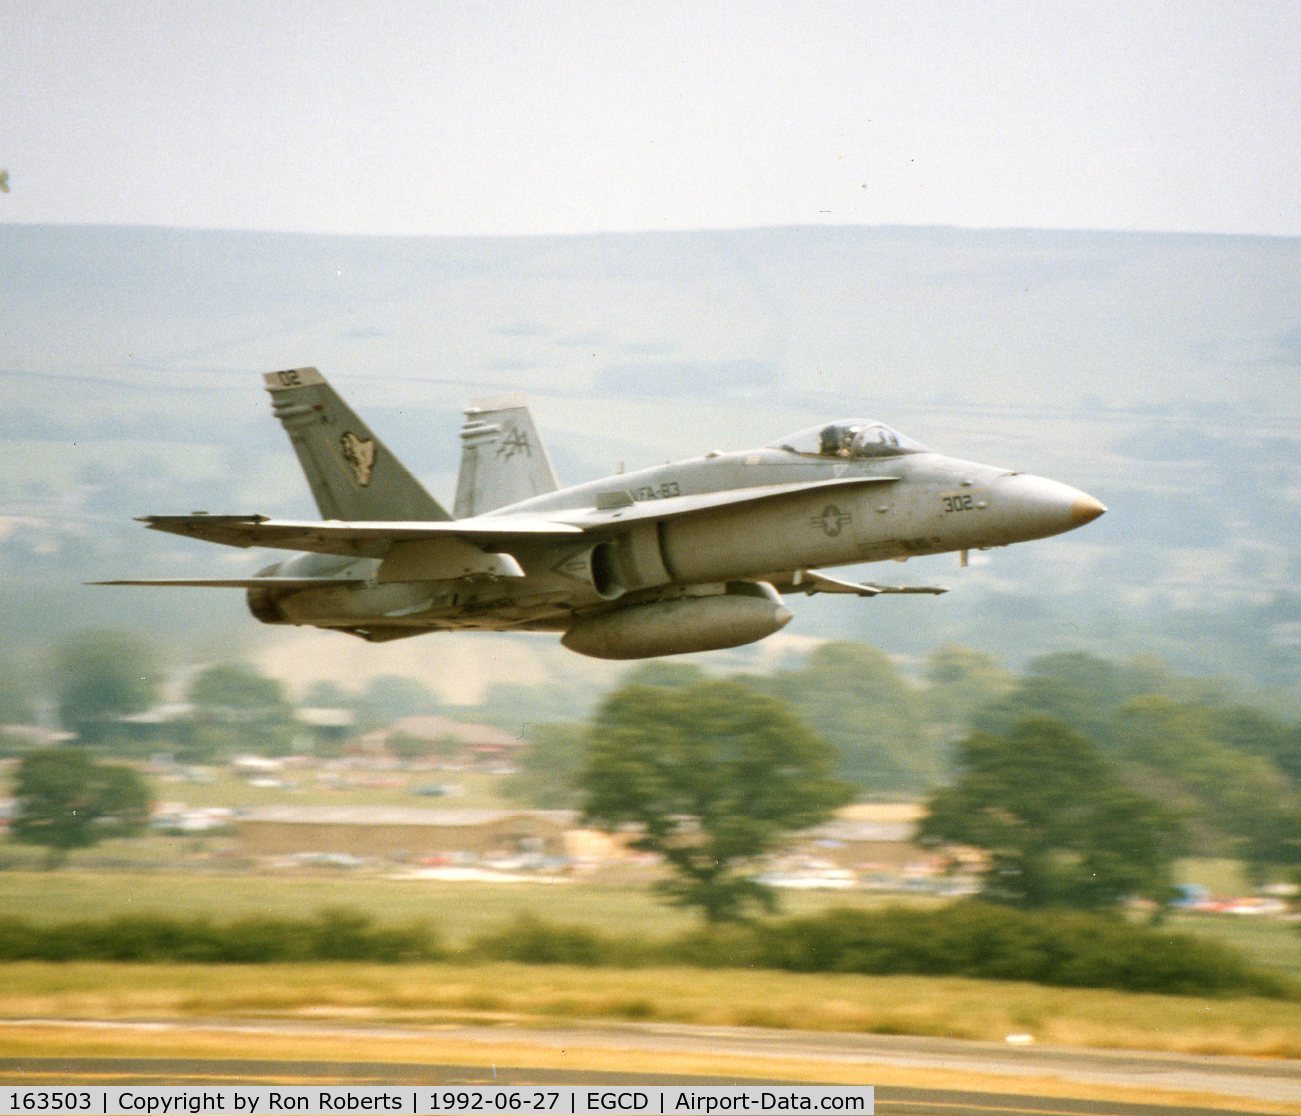 163503, 1988 McDonnell Douglas F/A-18C Hornet C/N 0746/C056, Woodford Airshow. Flew up from the Mediterranean off the USS Saratoga.